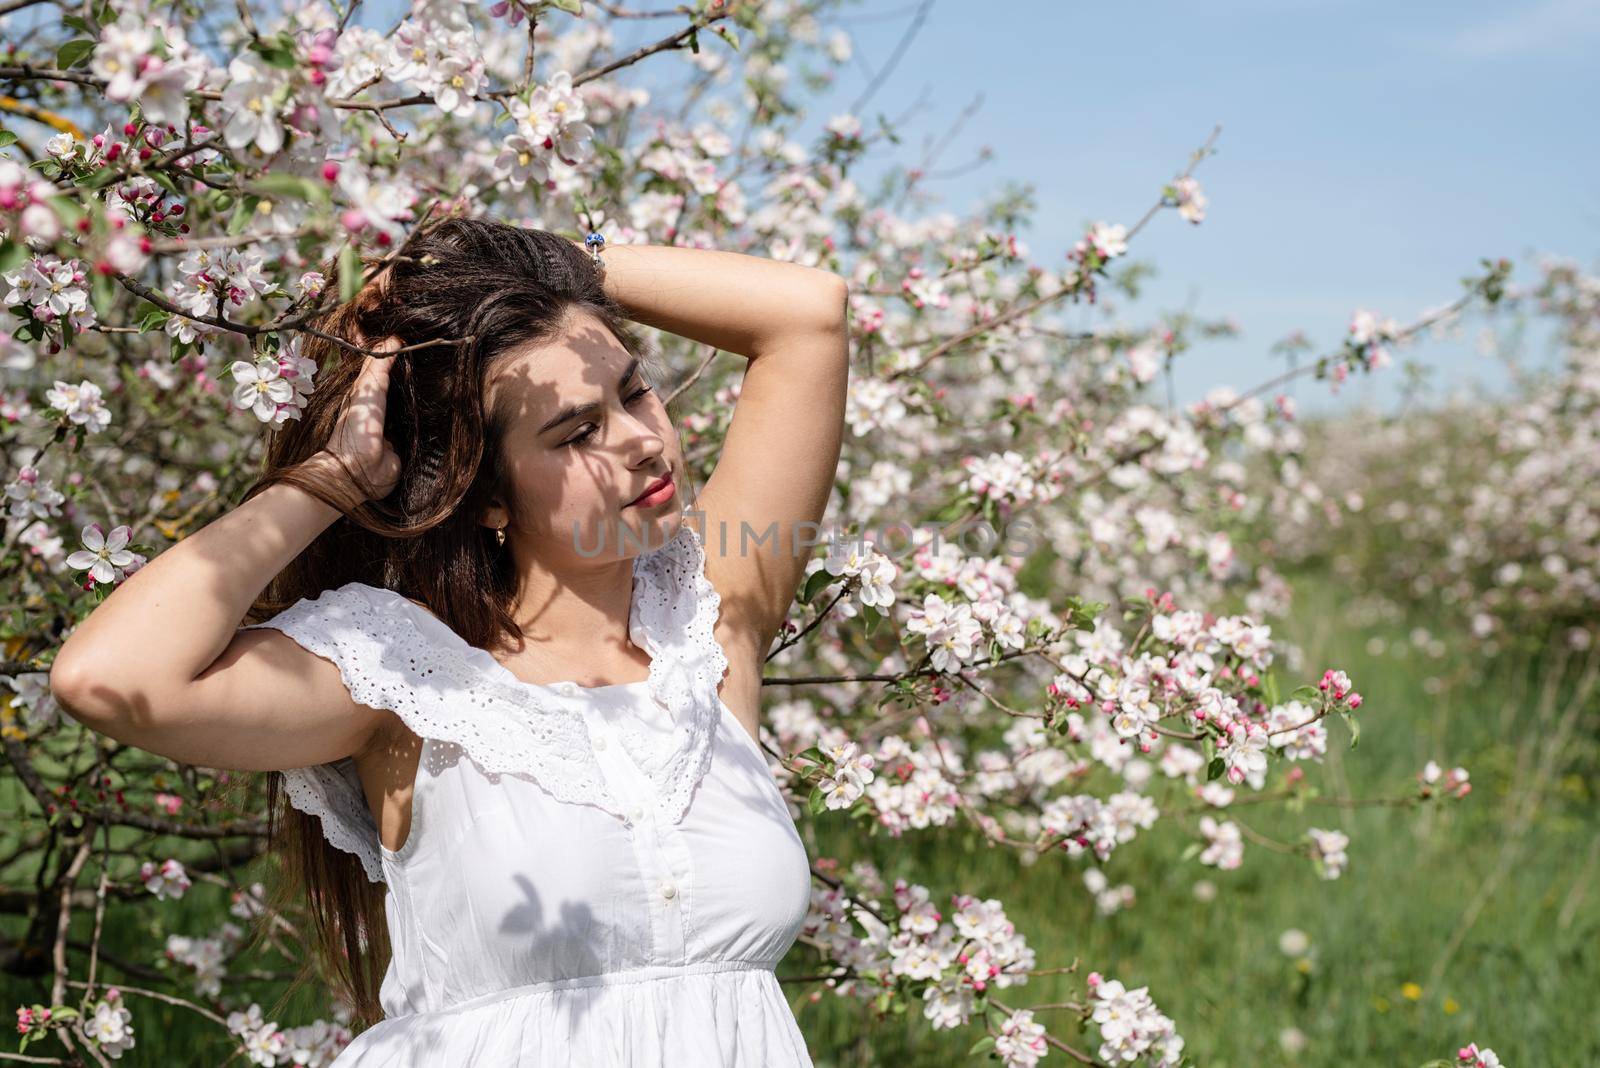 Young caucasian woman enjoying the flowering of an apple trees by Desperada